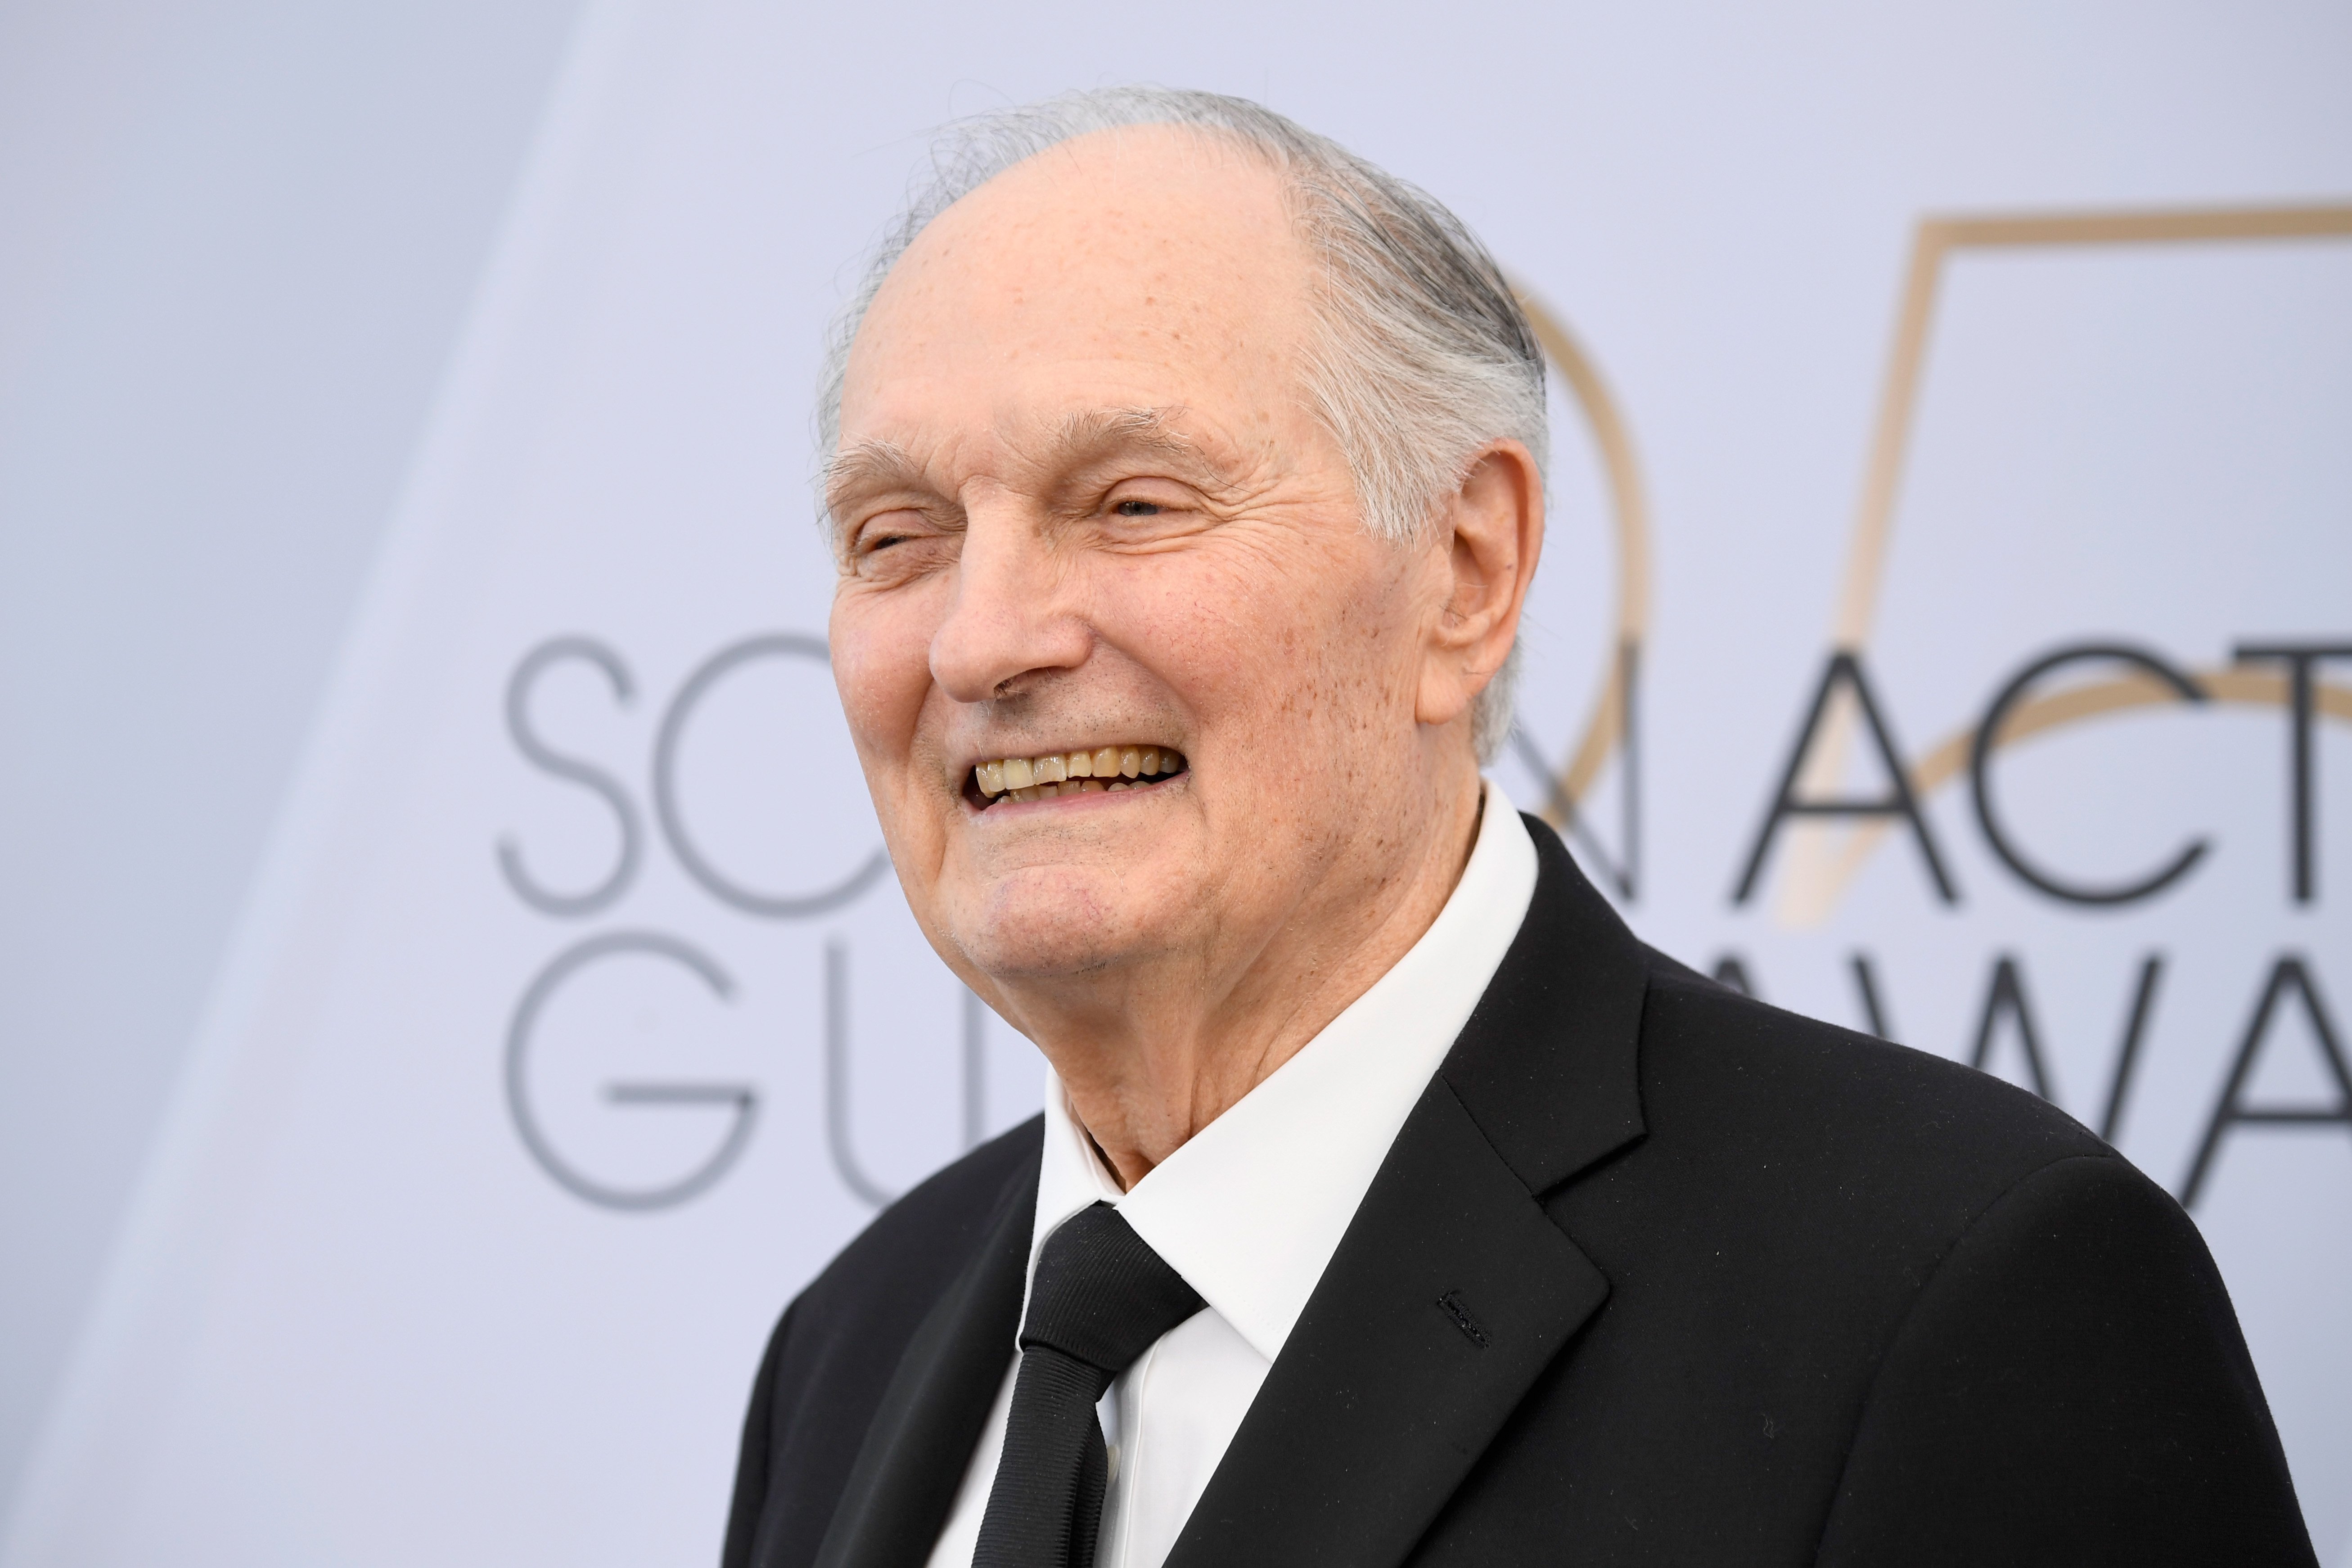 Alan Alda at the 25th Annual Screen Actors Guild Awards on January 27, 2019 in Los Angeles, California. | Photo: Getty Images